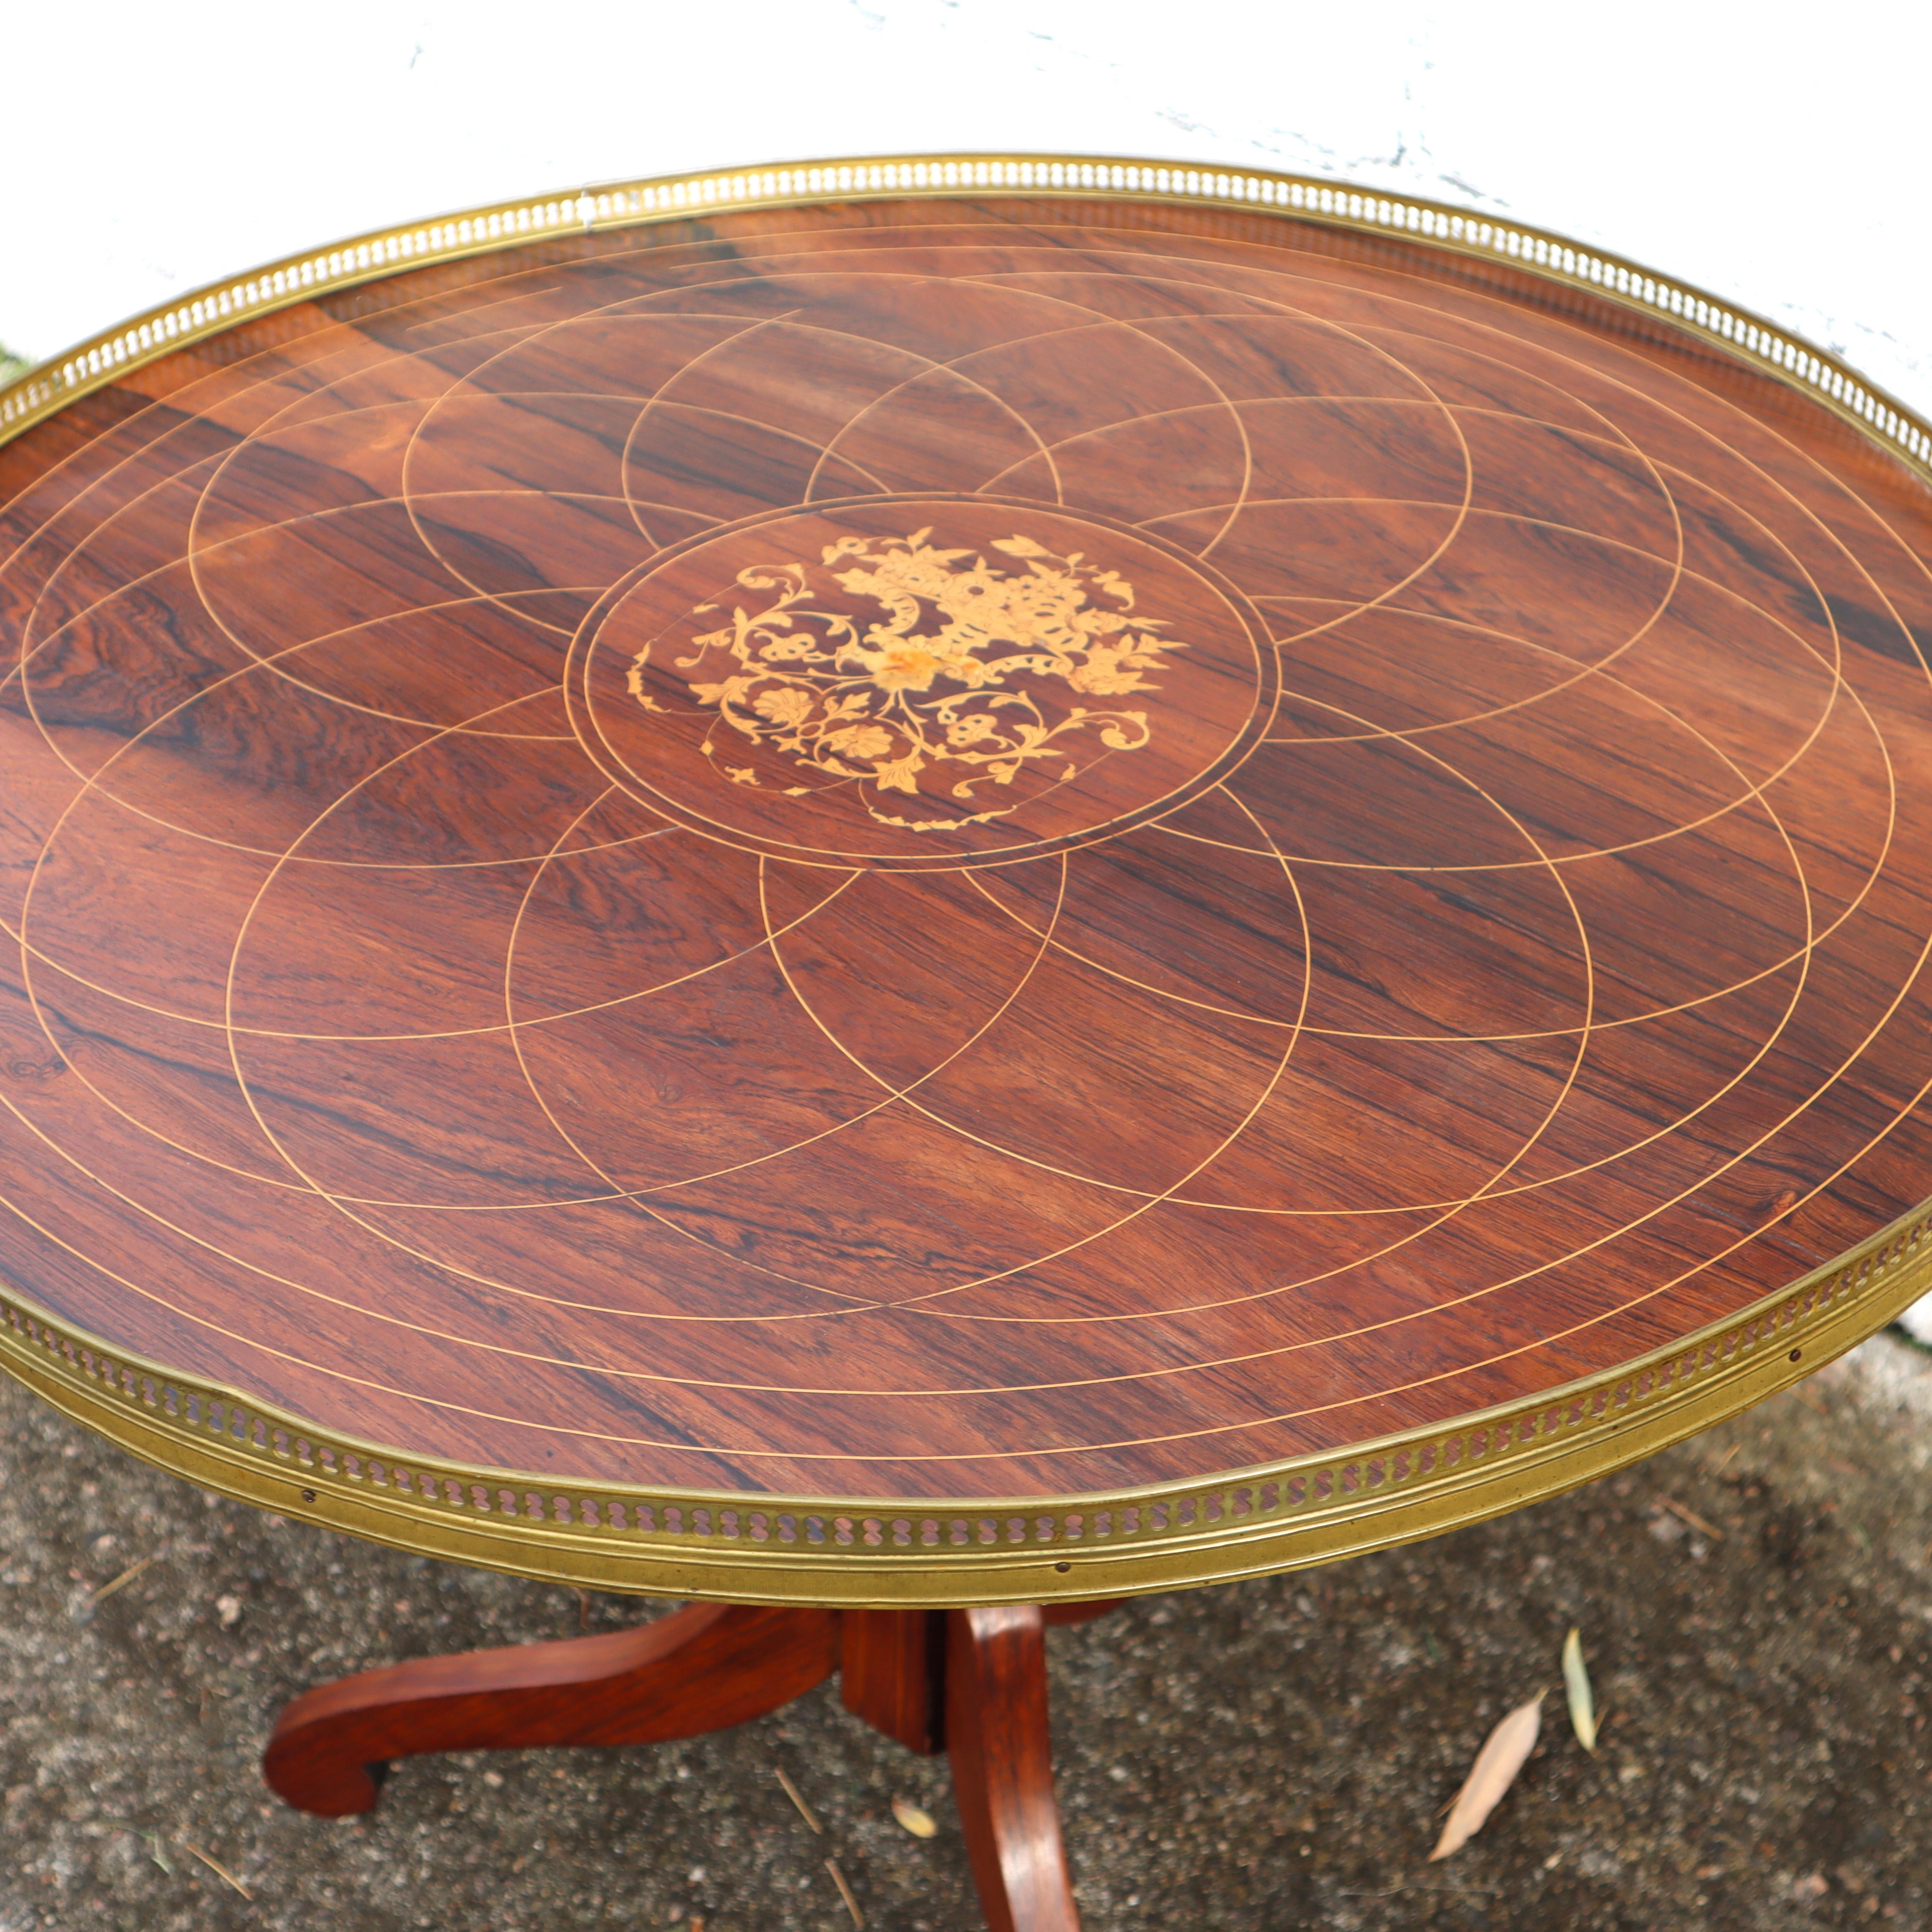 Vintage Neoclassical  Pedestal Table- Inlay work - Brass Gallery-60s For Sale 2